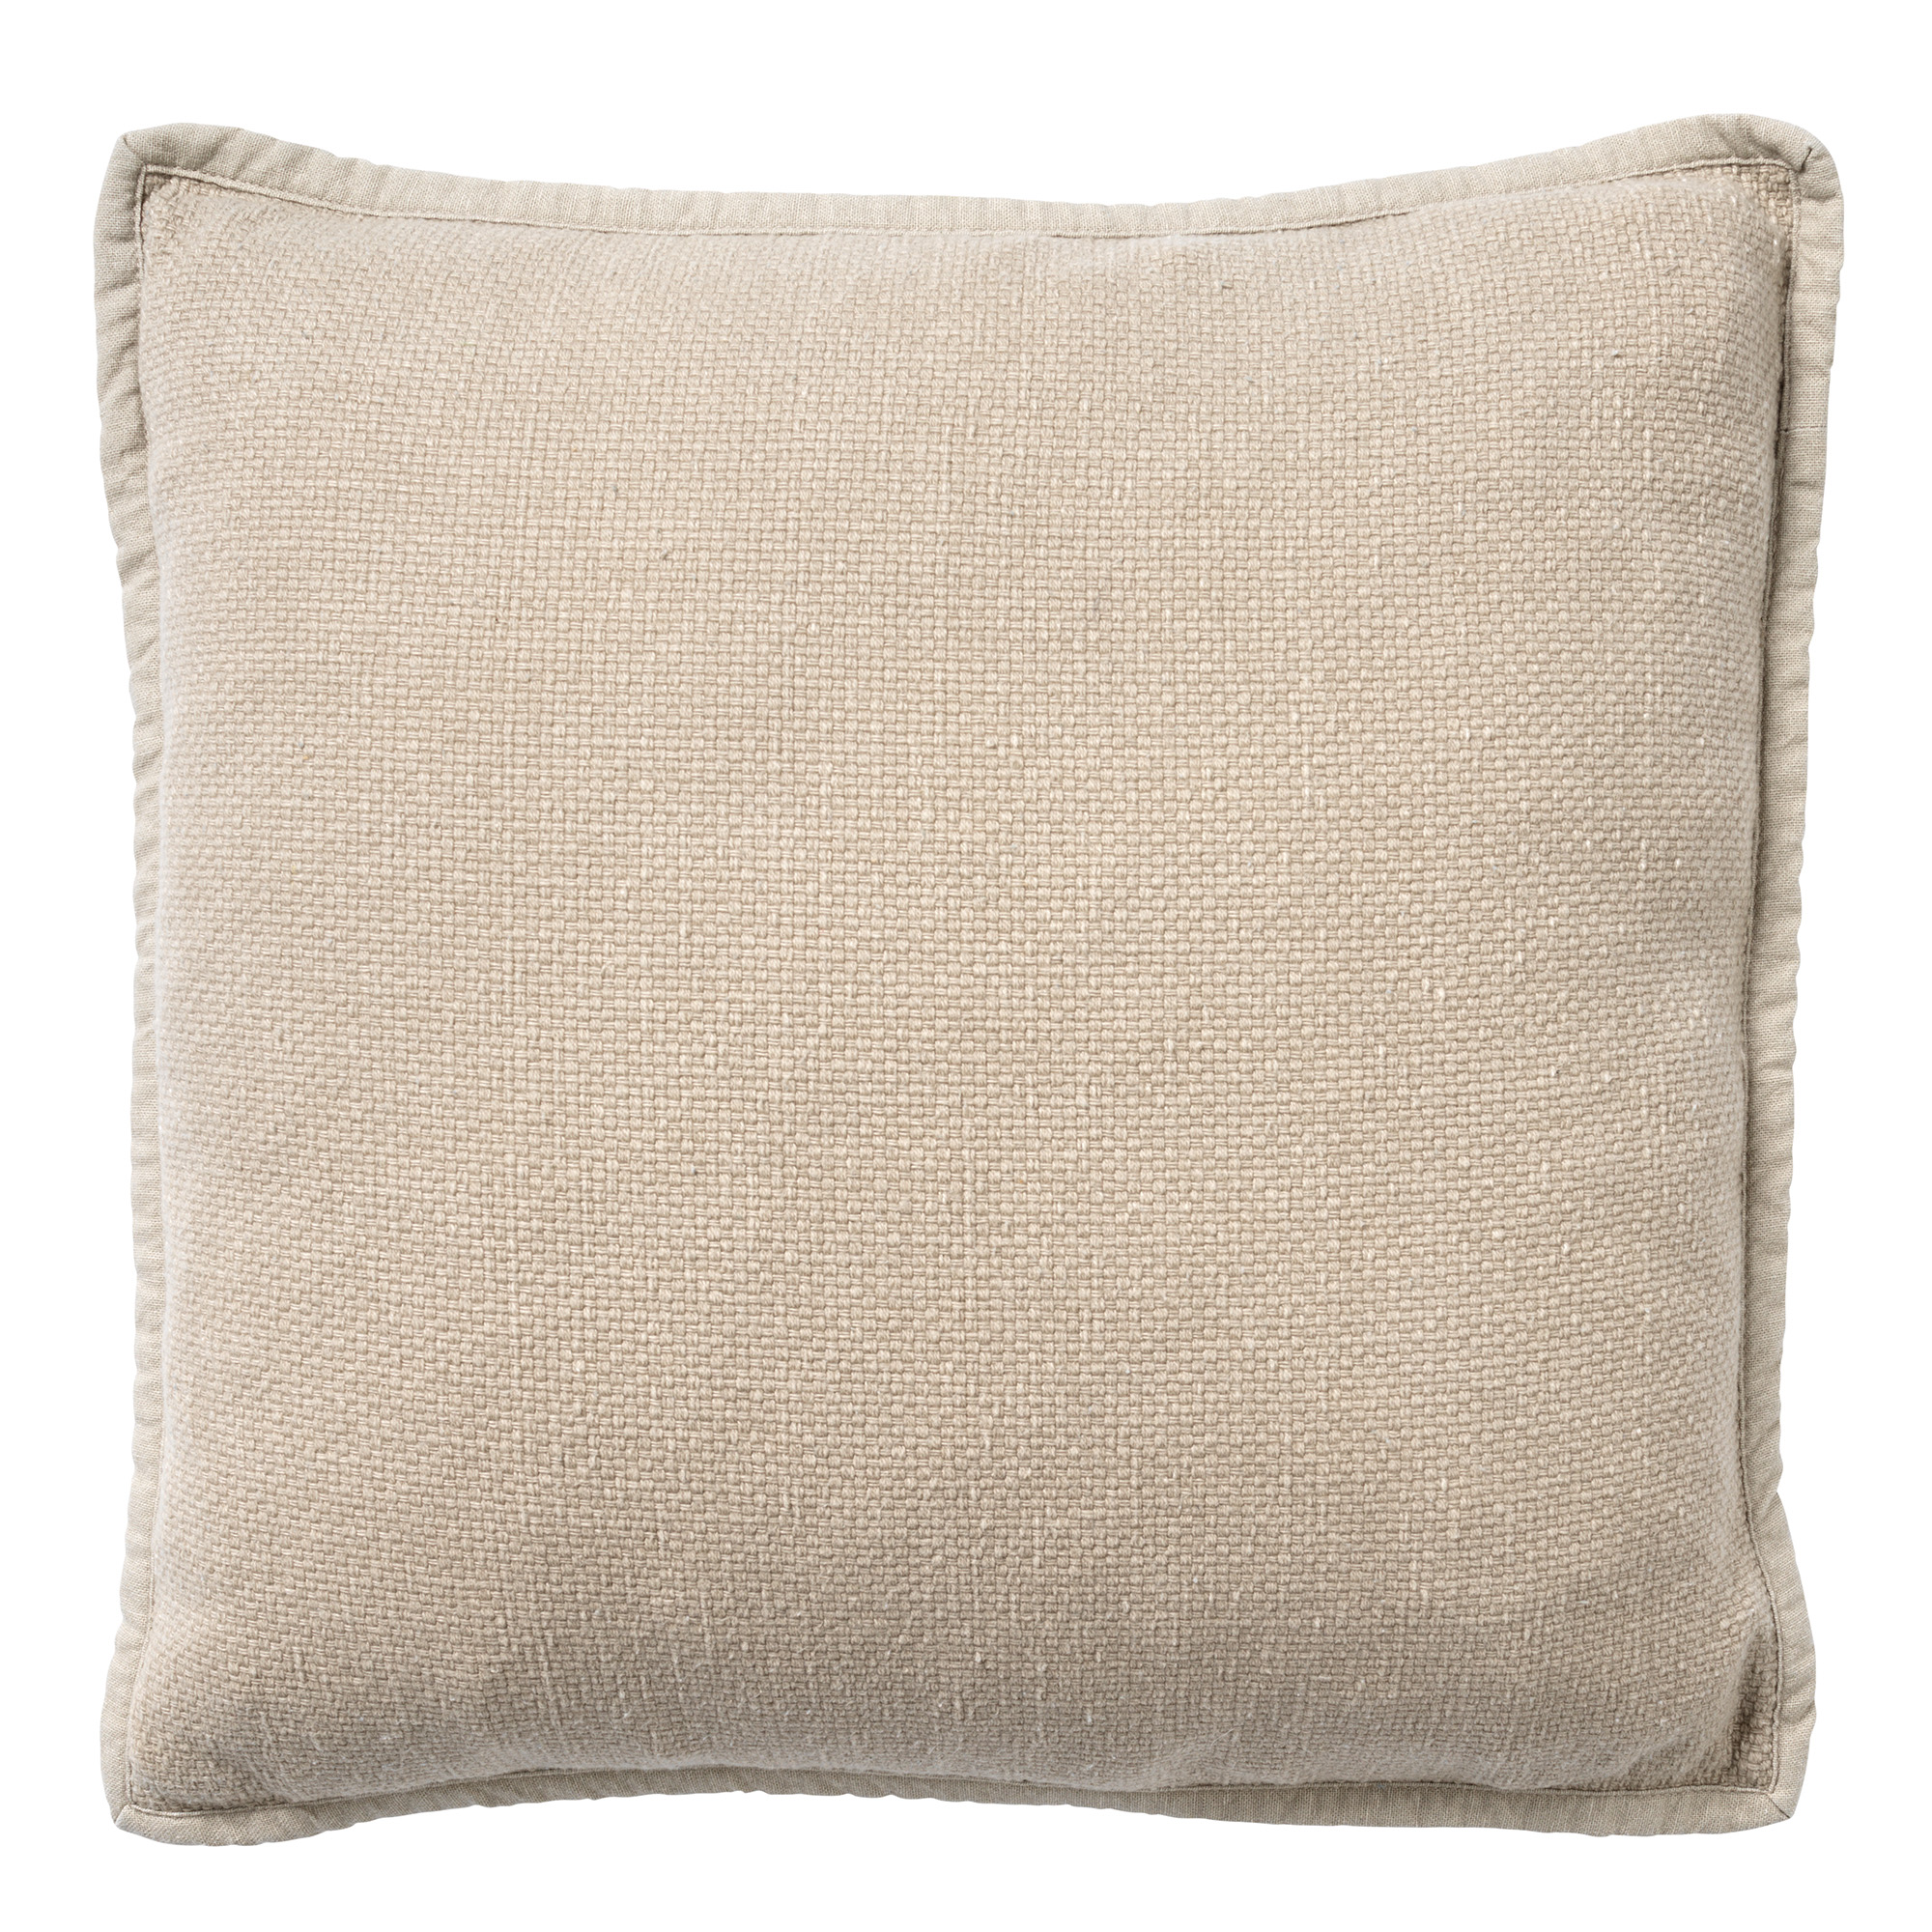 BOWIE - Cushion washed cotton 45x45 cm Pumice Stone